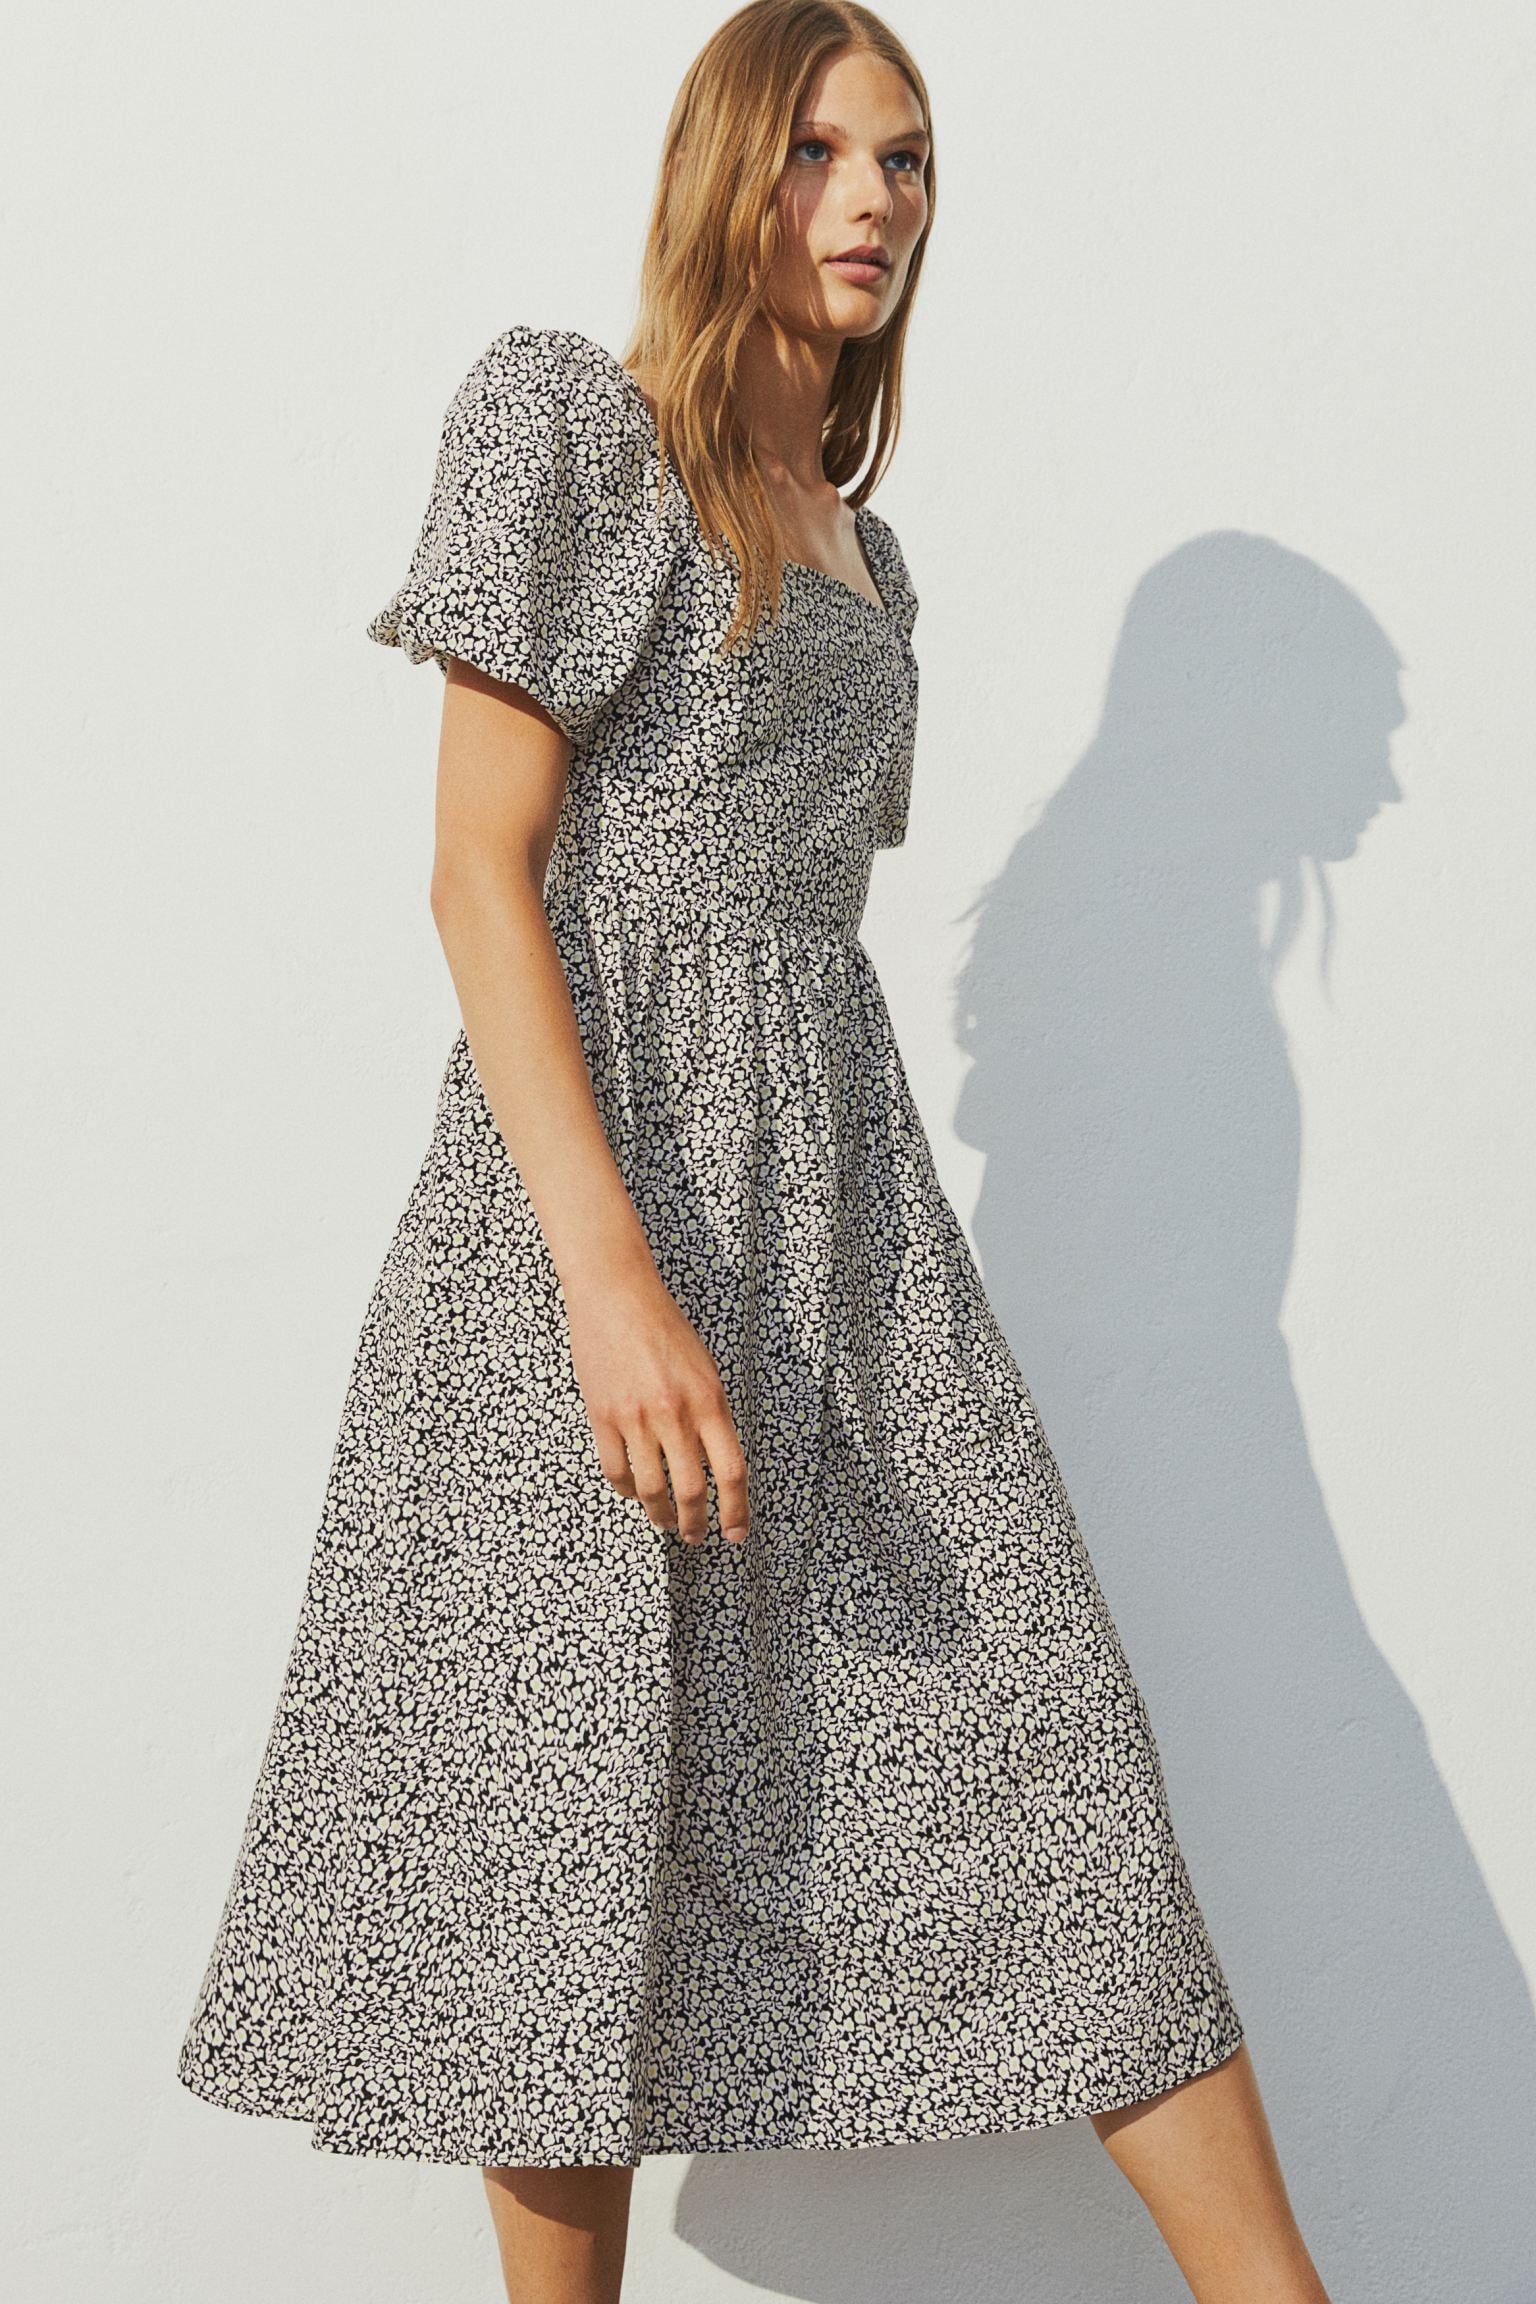 h and m swing dress